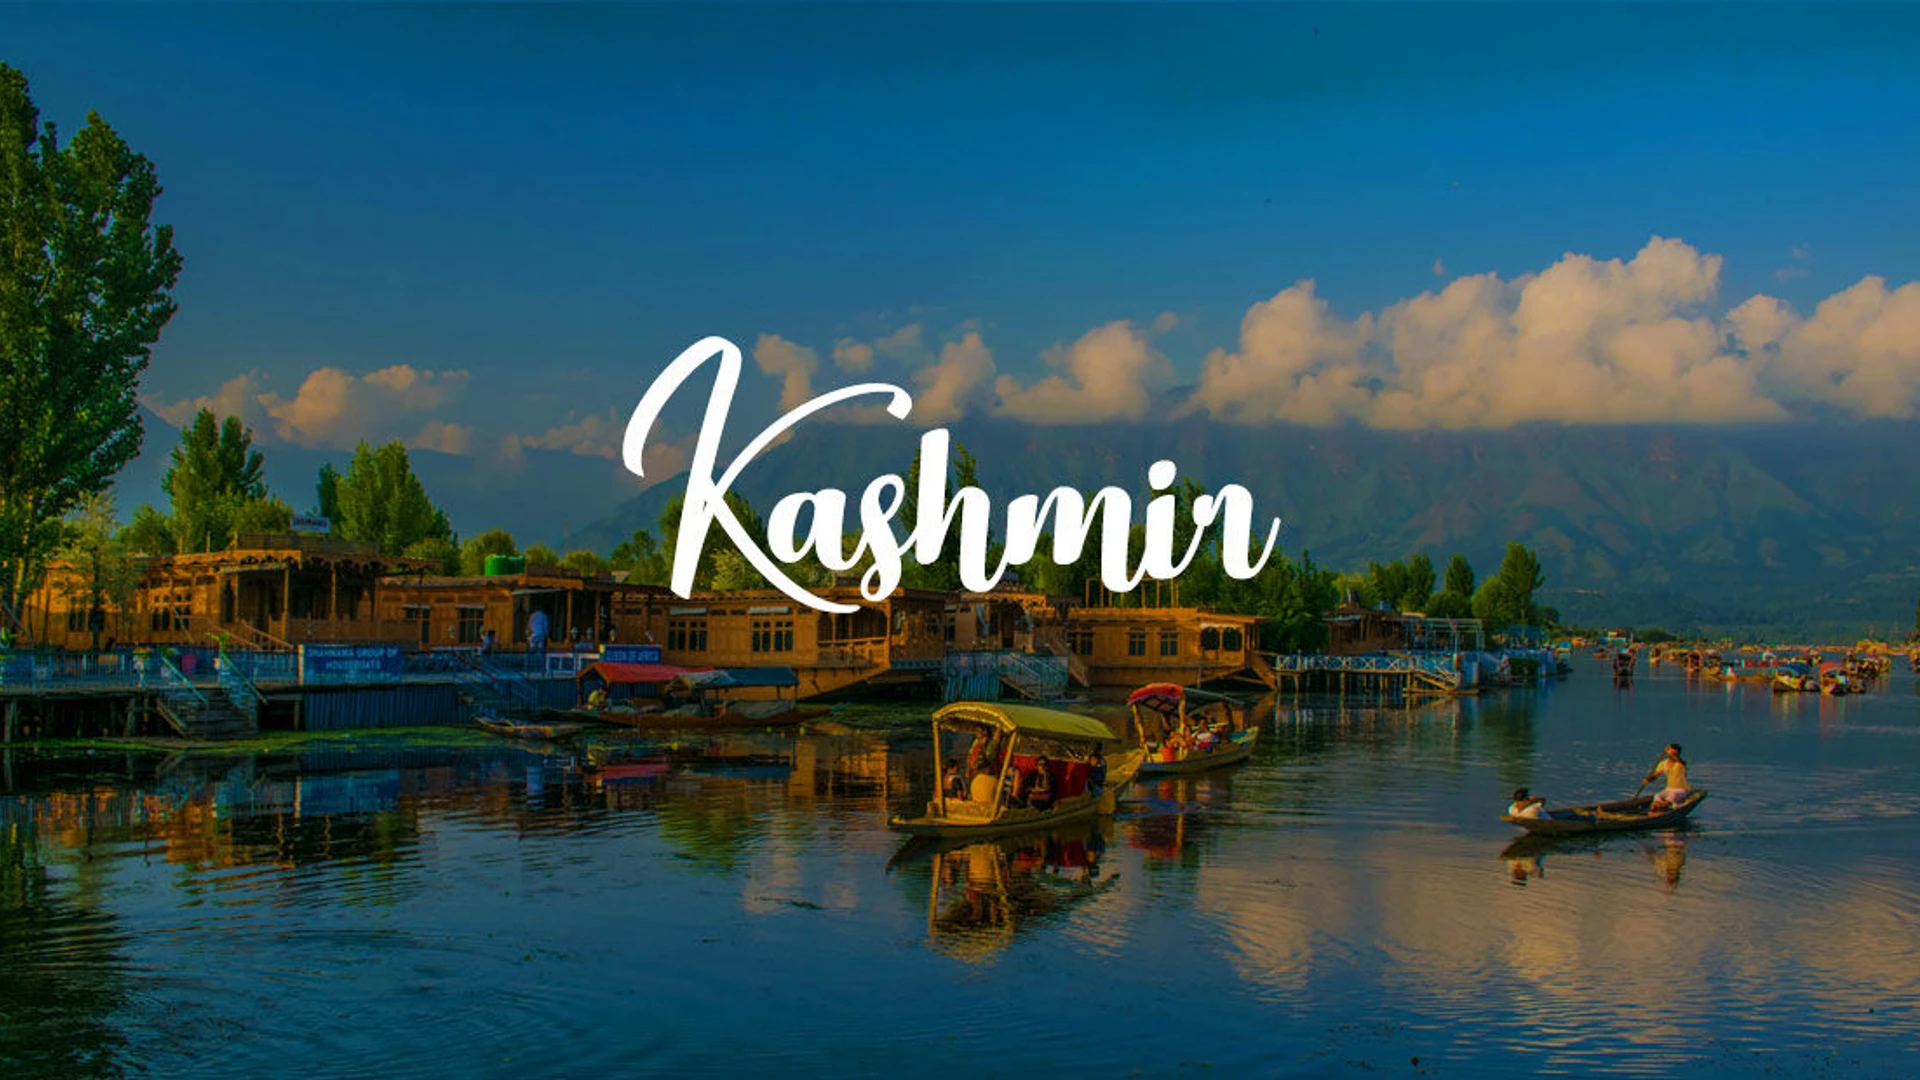 Kashmir Will Attract Over 35 Lakhs Tourists Next Year Once It Gets Train Connectivity